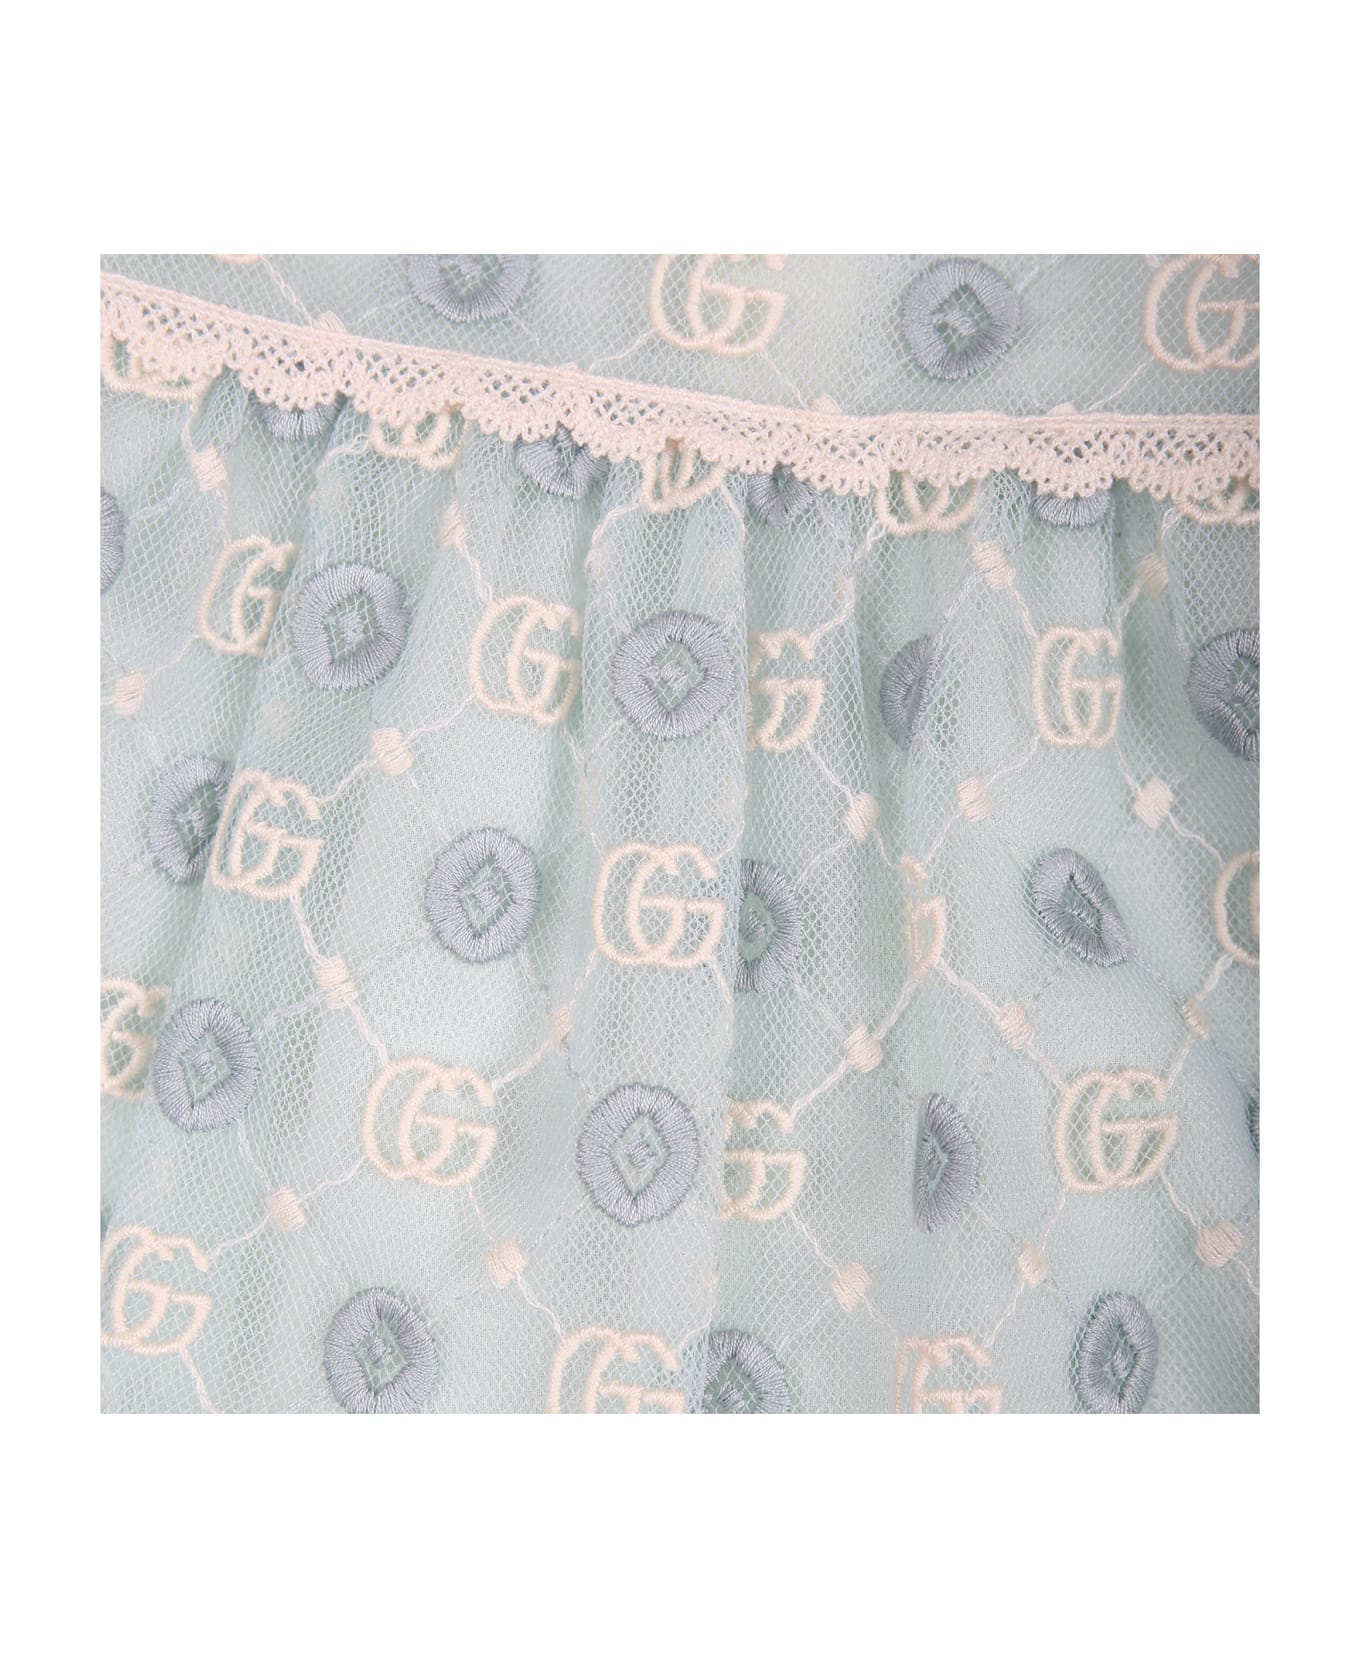 Gucci Light Blue Dress For Baby Girl With Geometric Pattern And Double G - Light Blue ウェア